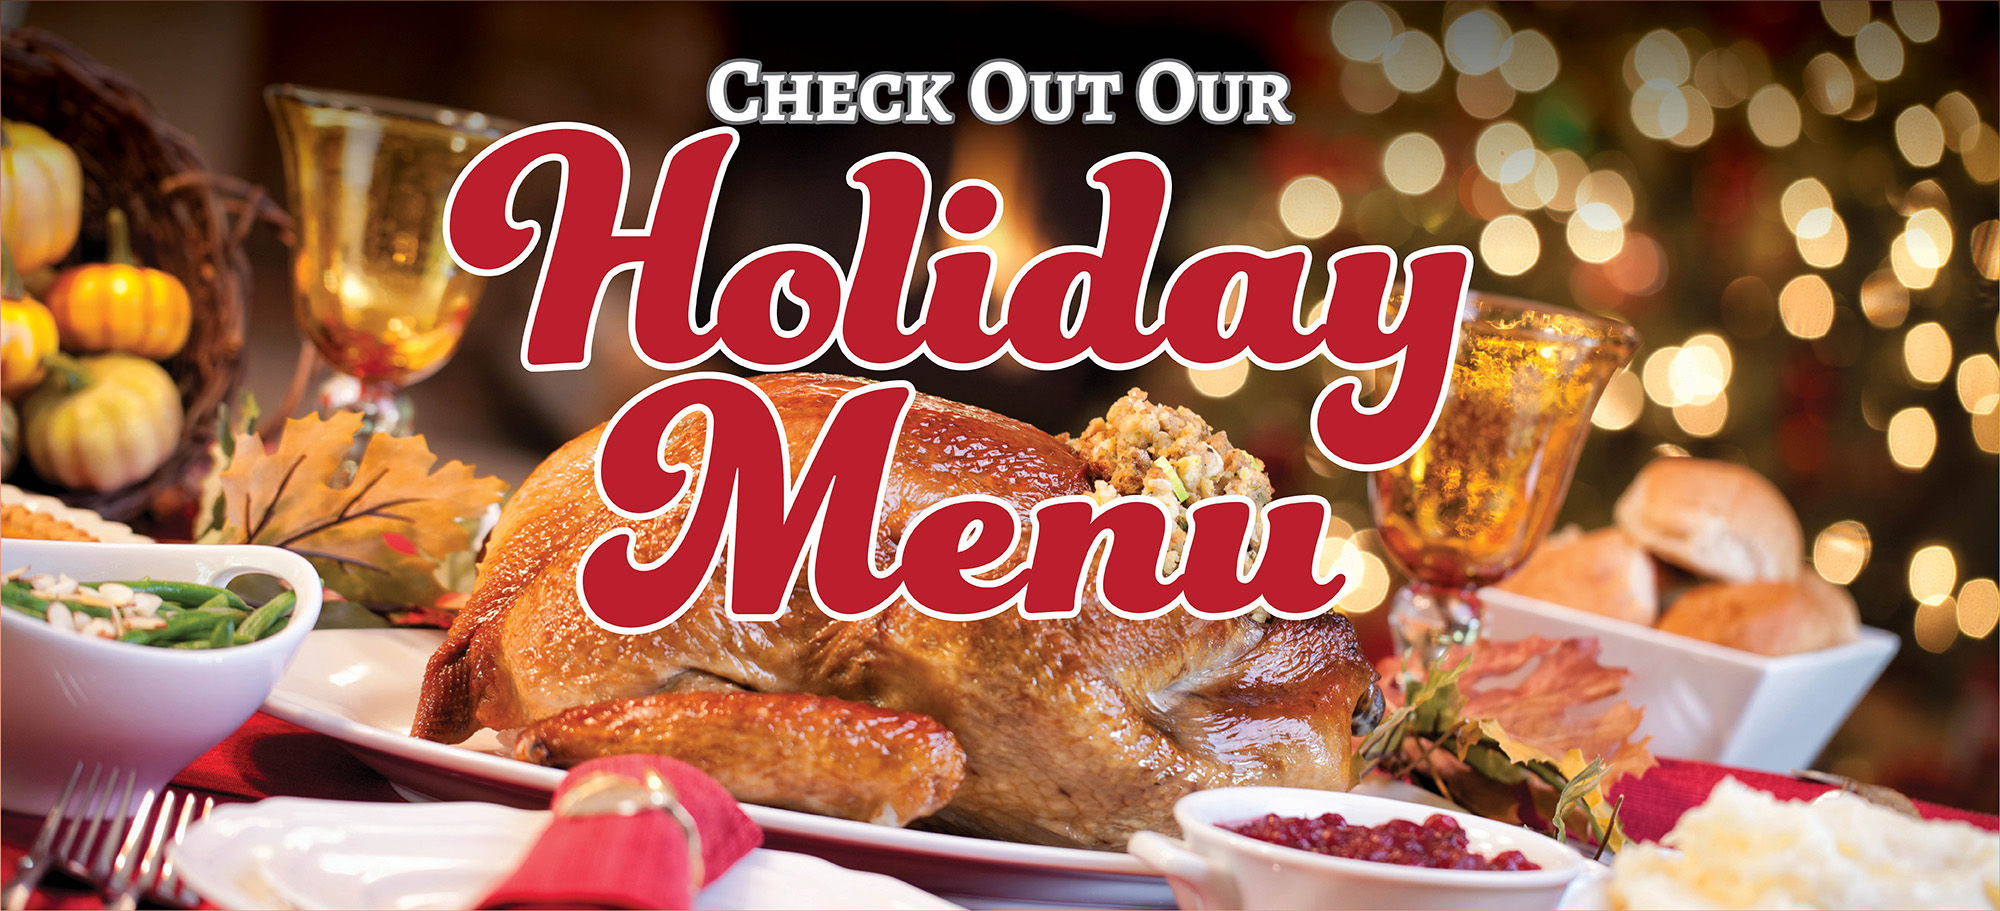 Check Out Our Holiday Menu